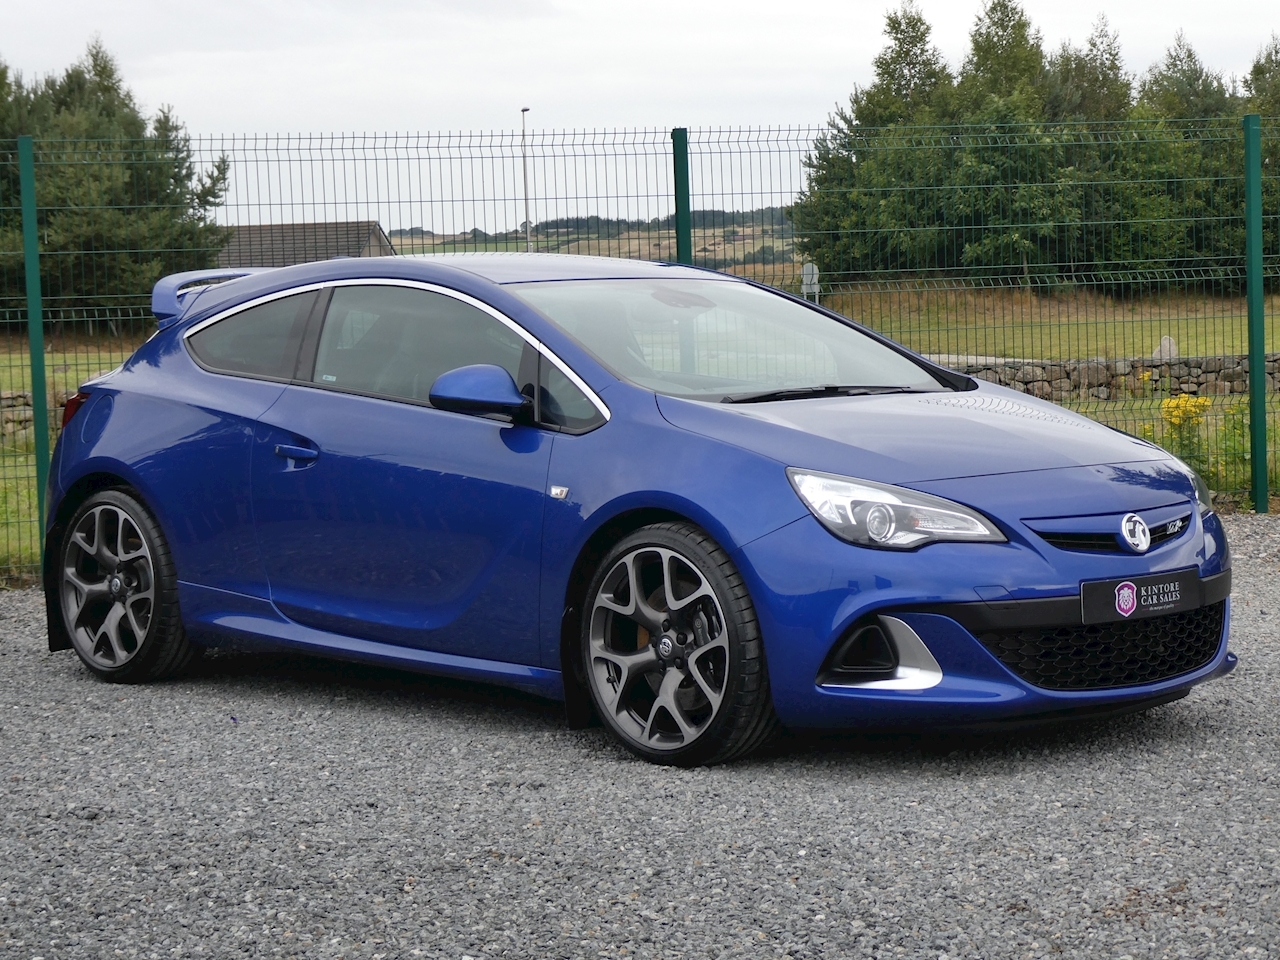 Astra GTC 2.0T VXR Coupe, Manual 2.0 3dr Coupe Manual Petrol